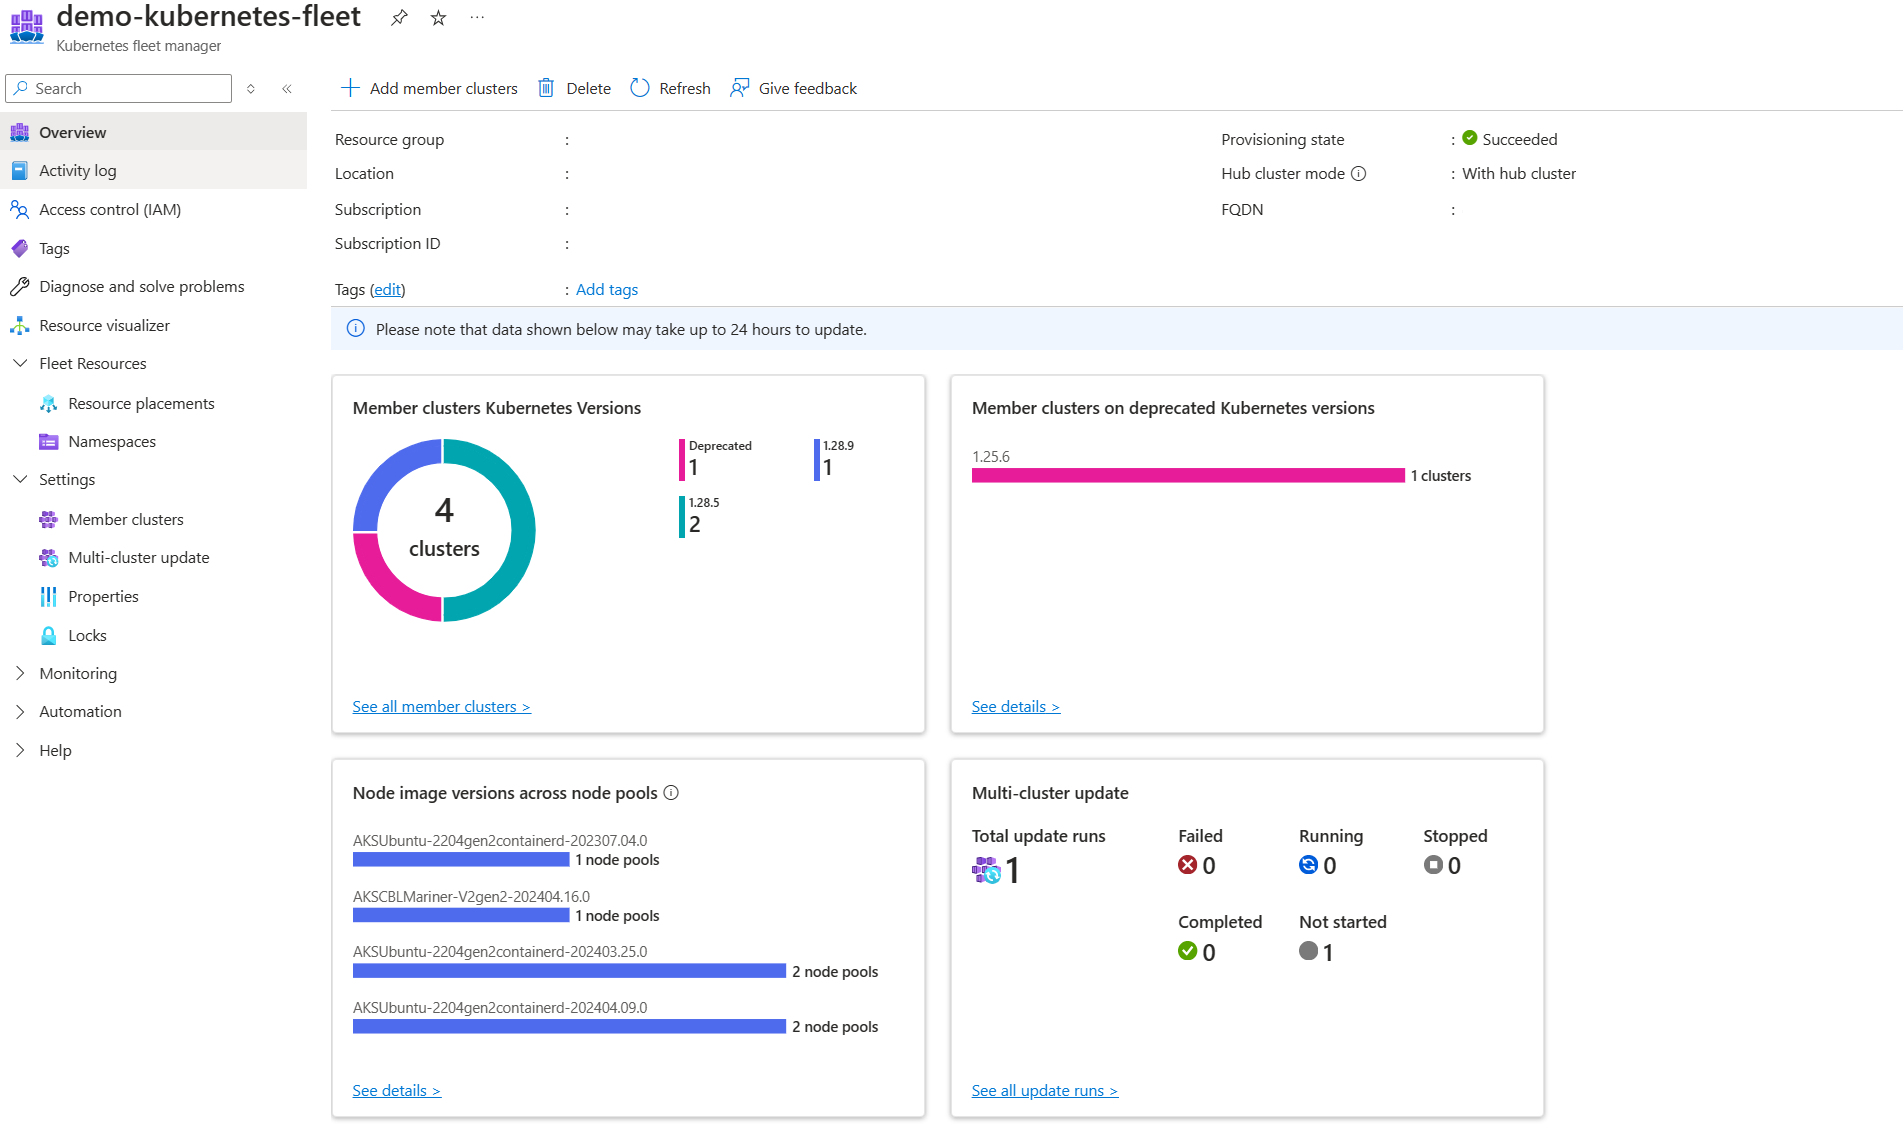 Screenshot of the Azure portal pane for a fleet resource, showing member cluster Kubernetes versions and node images in use across all node pools of member clusters.